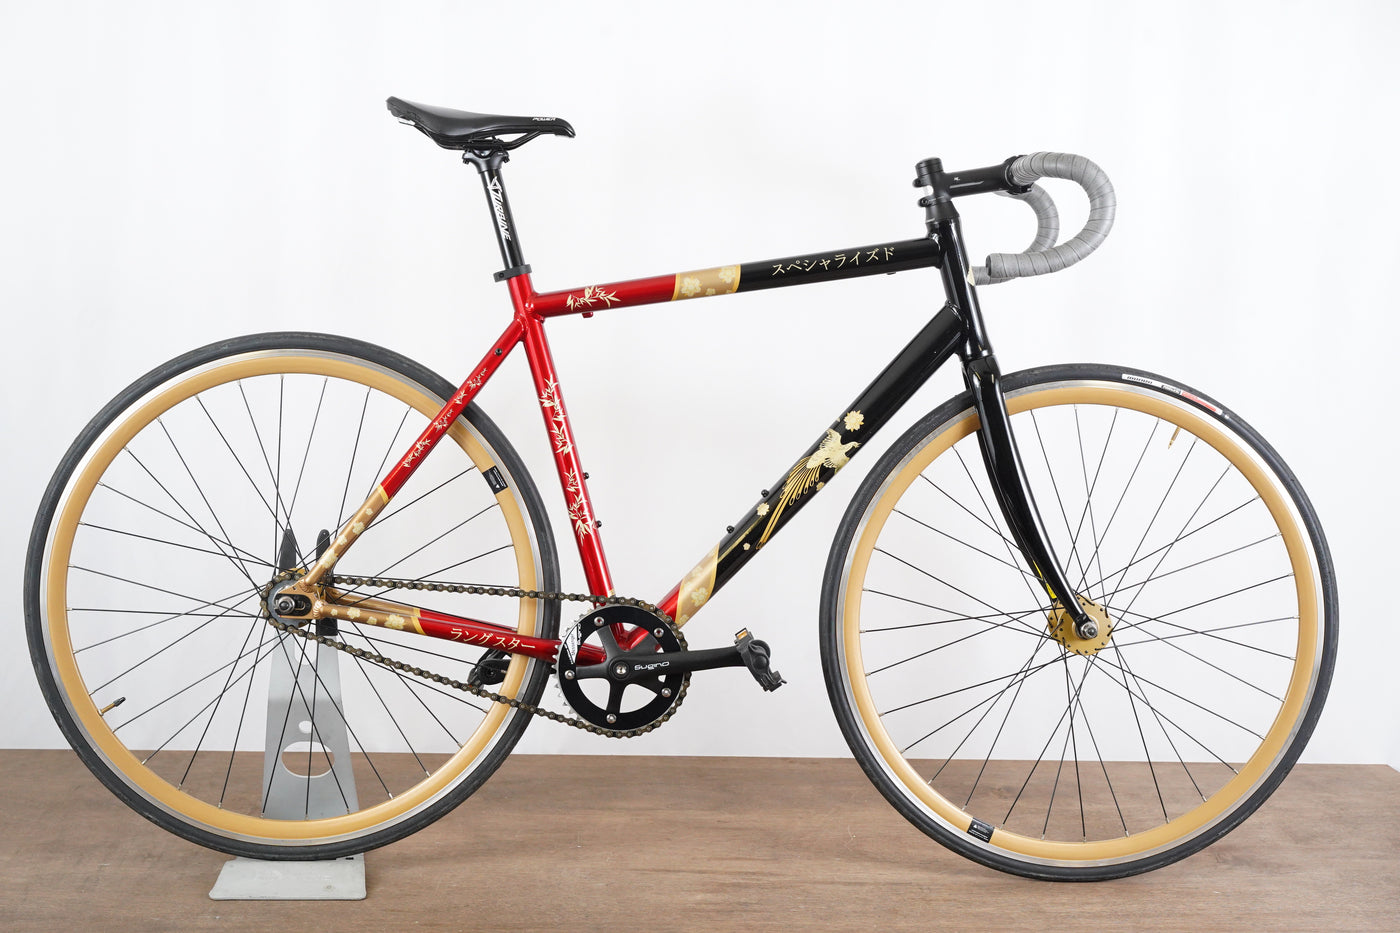 55cm Specialized Langster Tokyo Edition Single Speed Alloy Track Bike